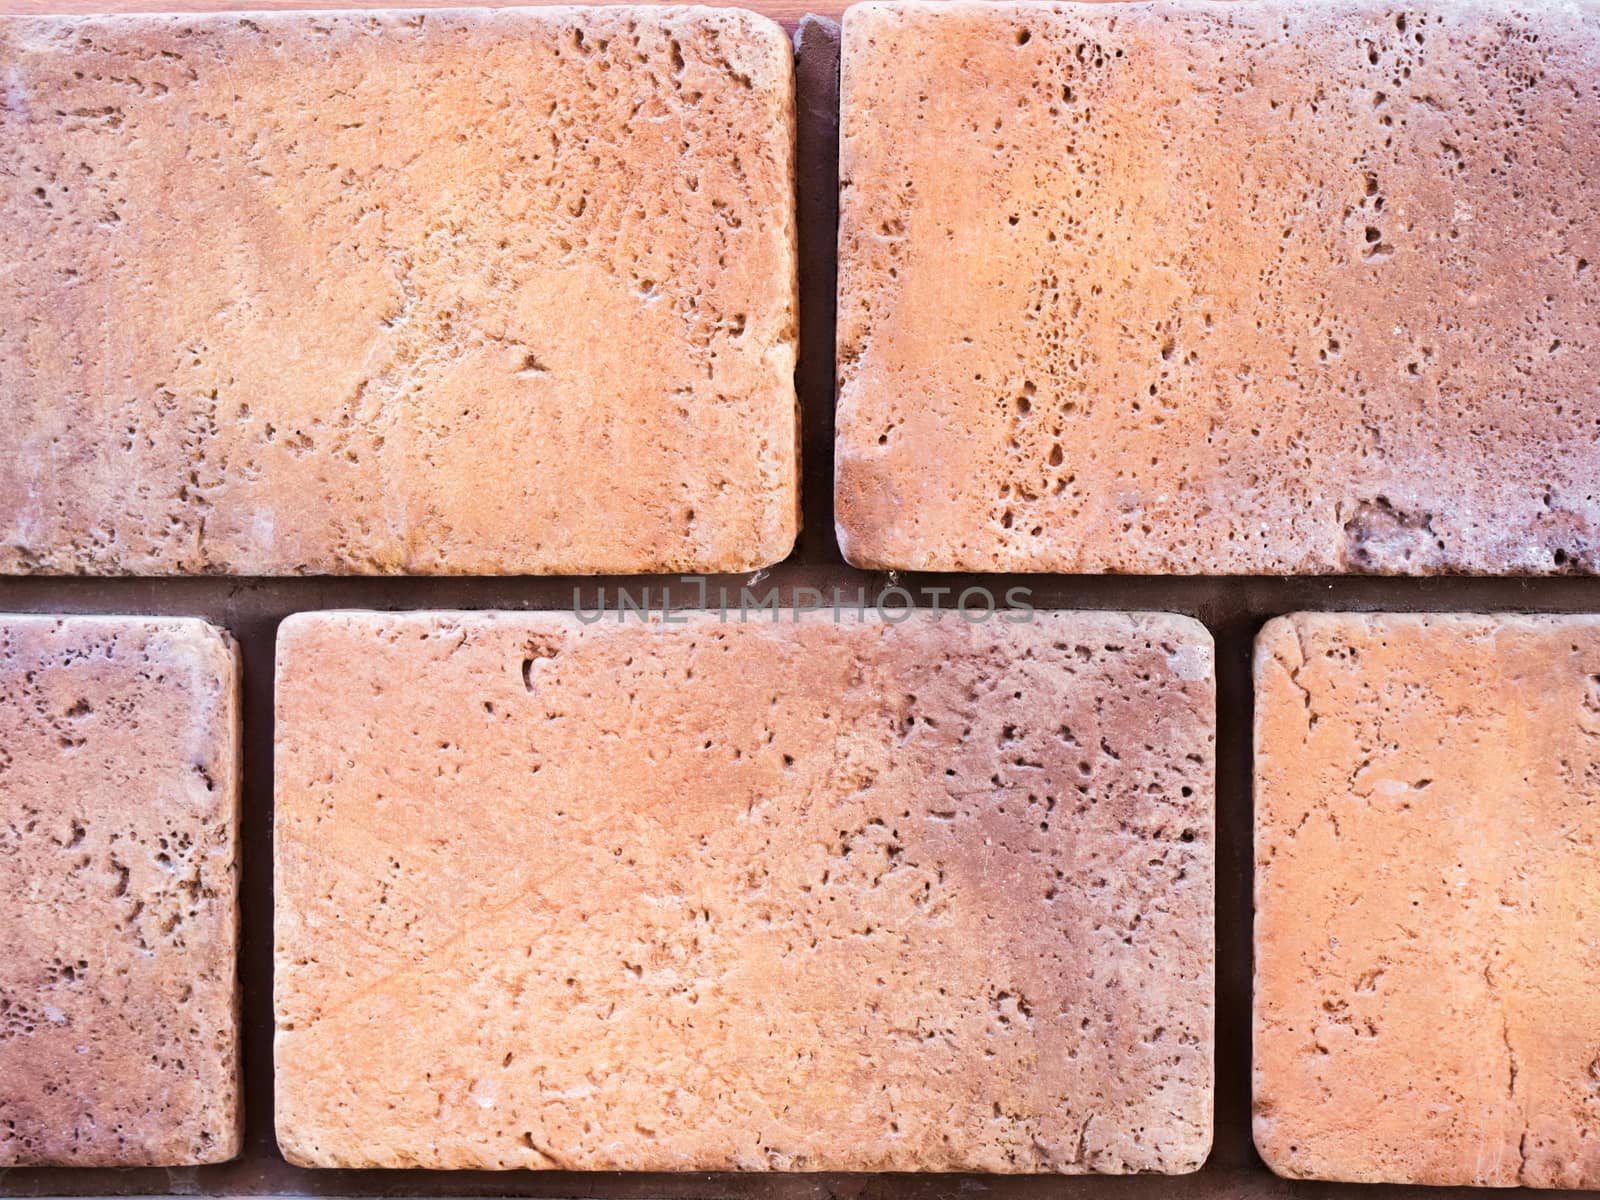 a wall from an artificial beige and red stone facade with rough fractured surfaces, laid as a brick